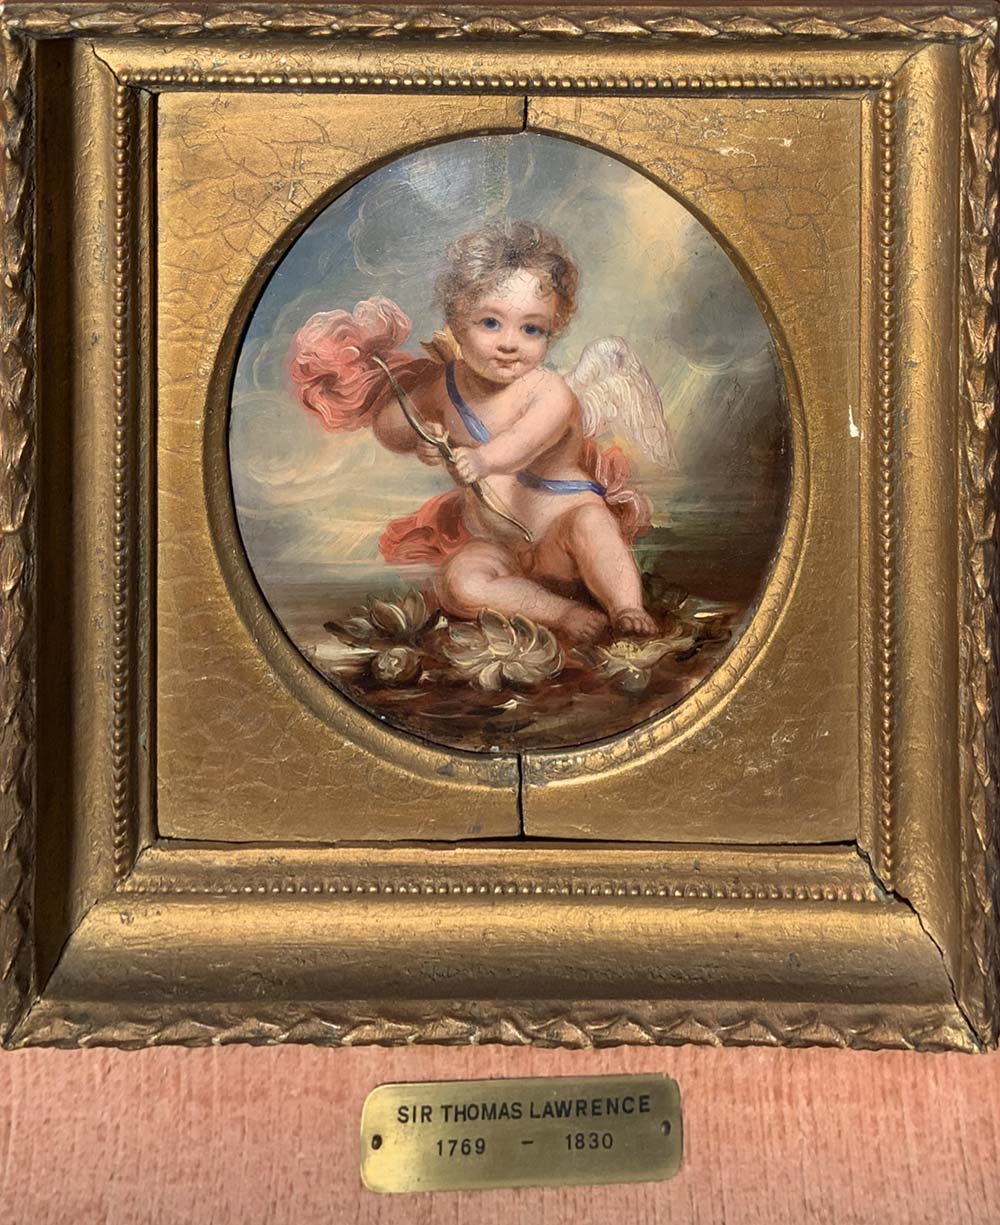 Oil painting on papier machè, allegedly by Sir Thomas Lawrence, Cupid with bow and arrow - Image 2 of 4